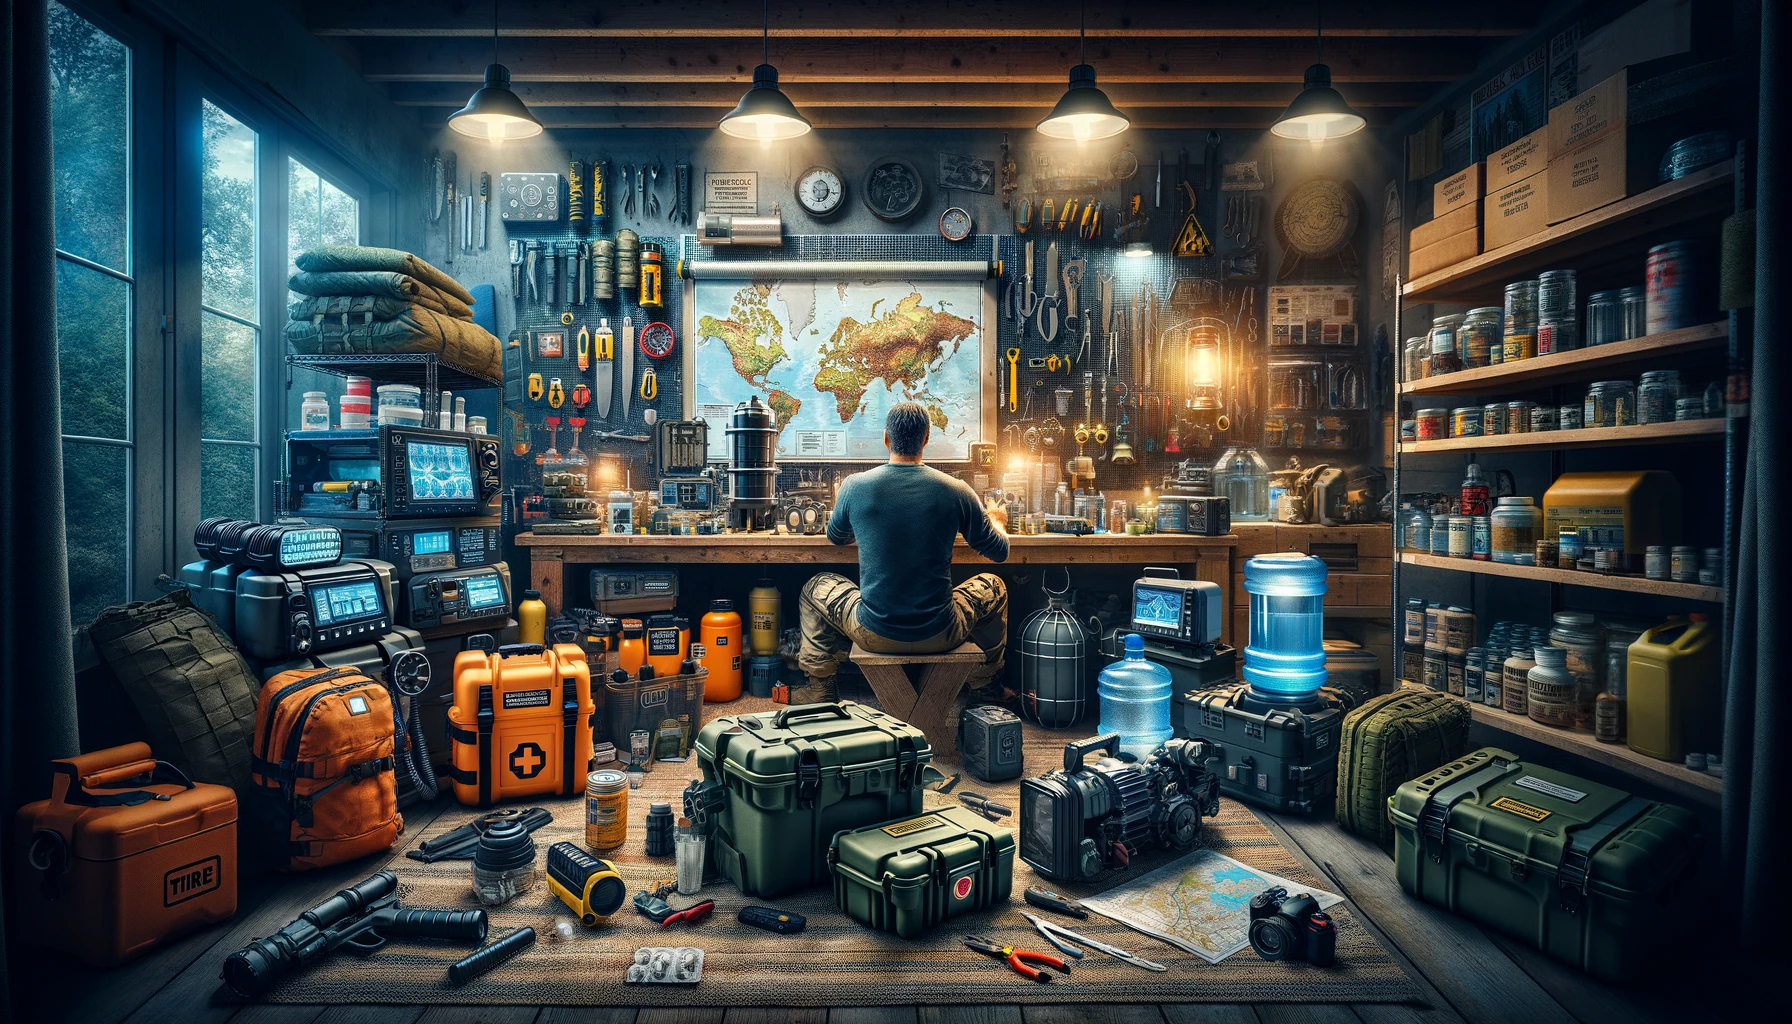 Prepper in a gear room filled with essential survival equipment, including water filtration, multi-tool, food supplies, medical kit, flashlight, radio, and maps, highlighting the importance of being prepared with must-have survival gear